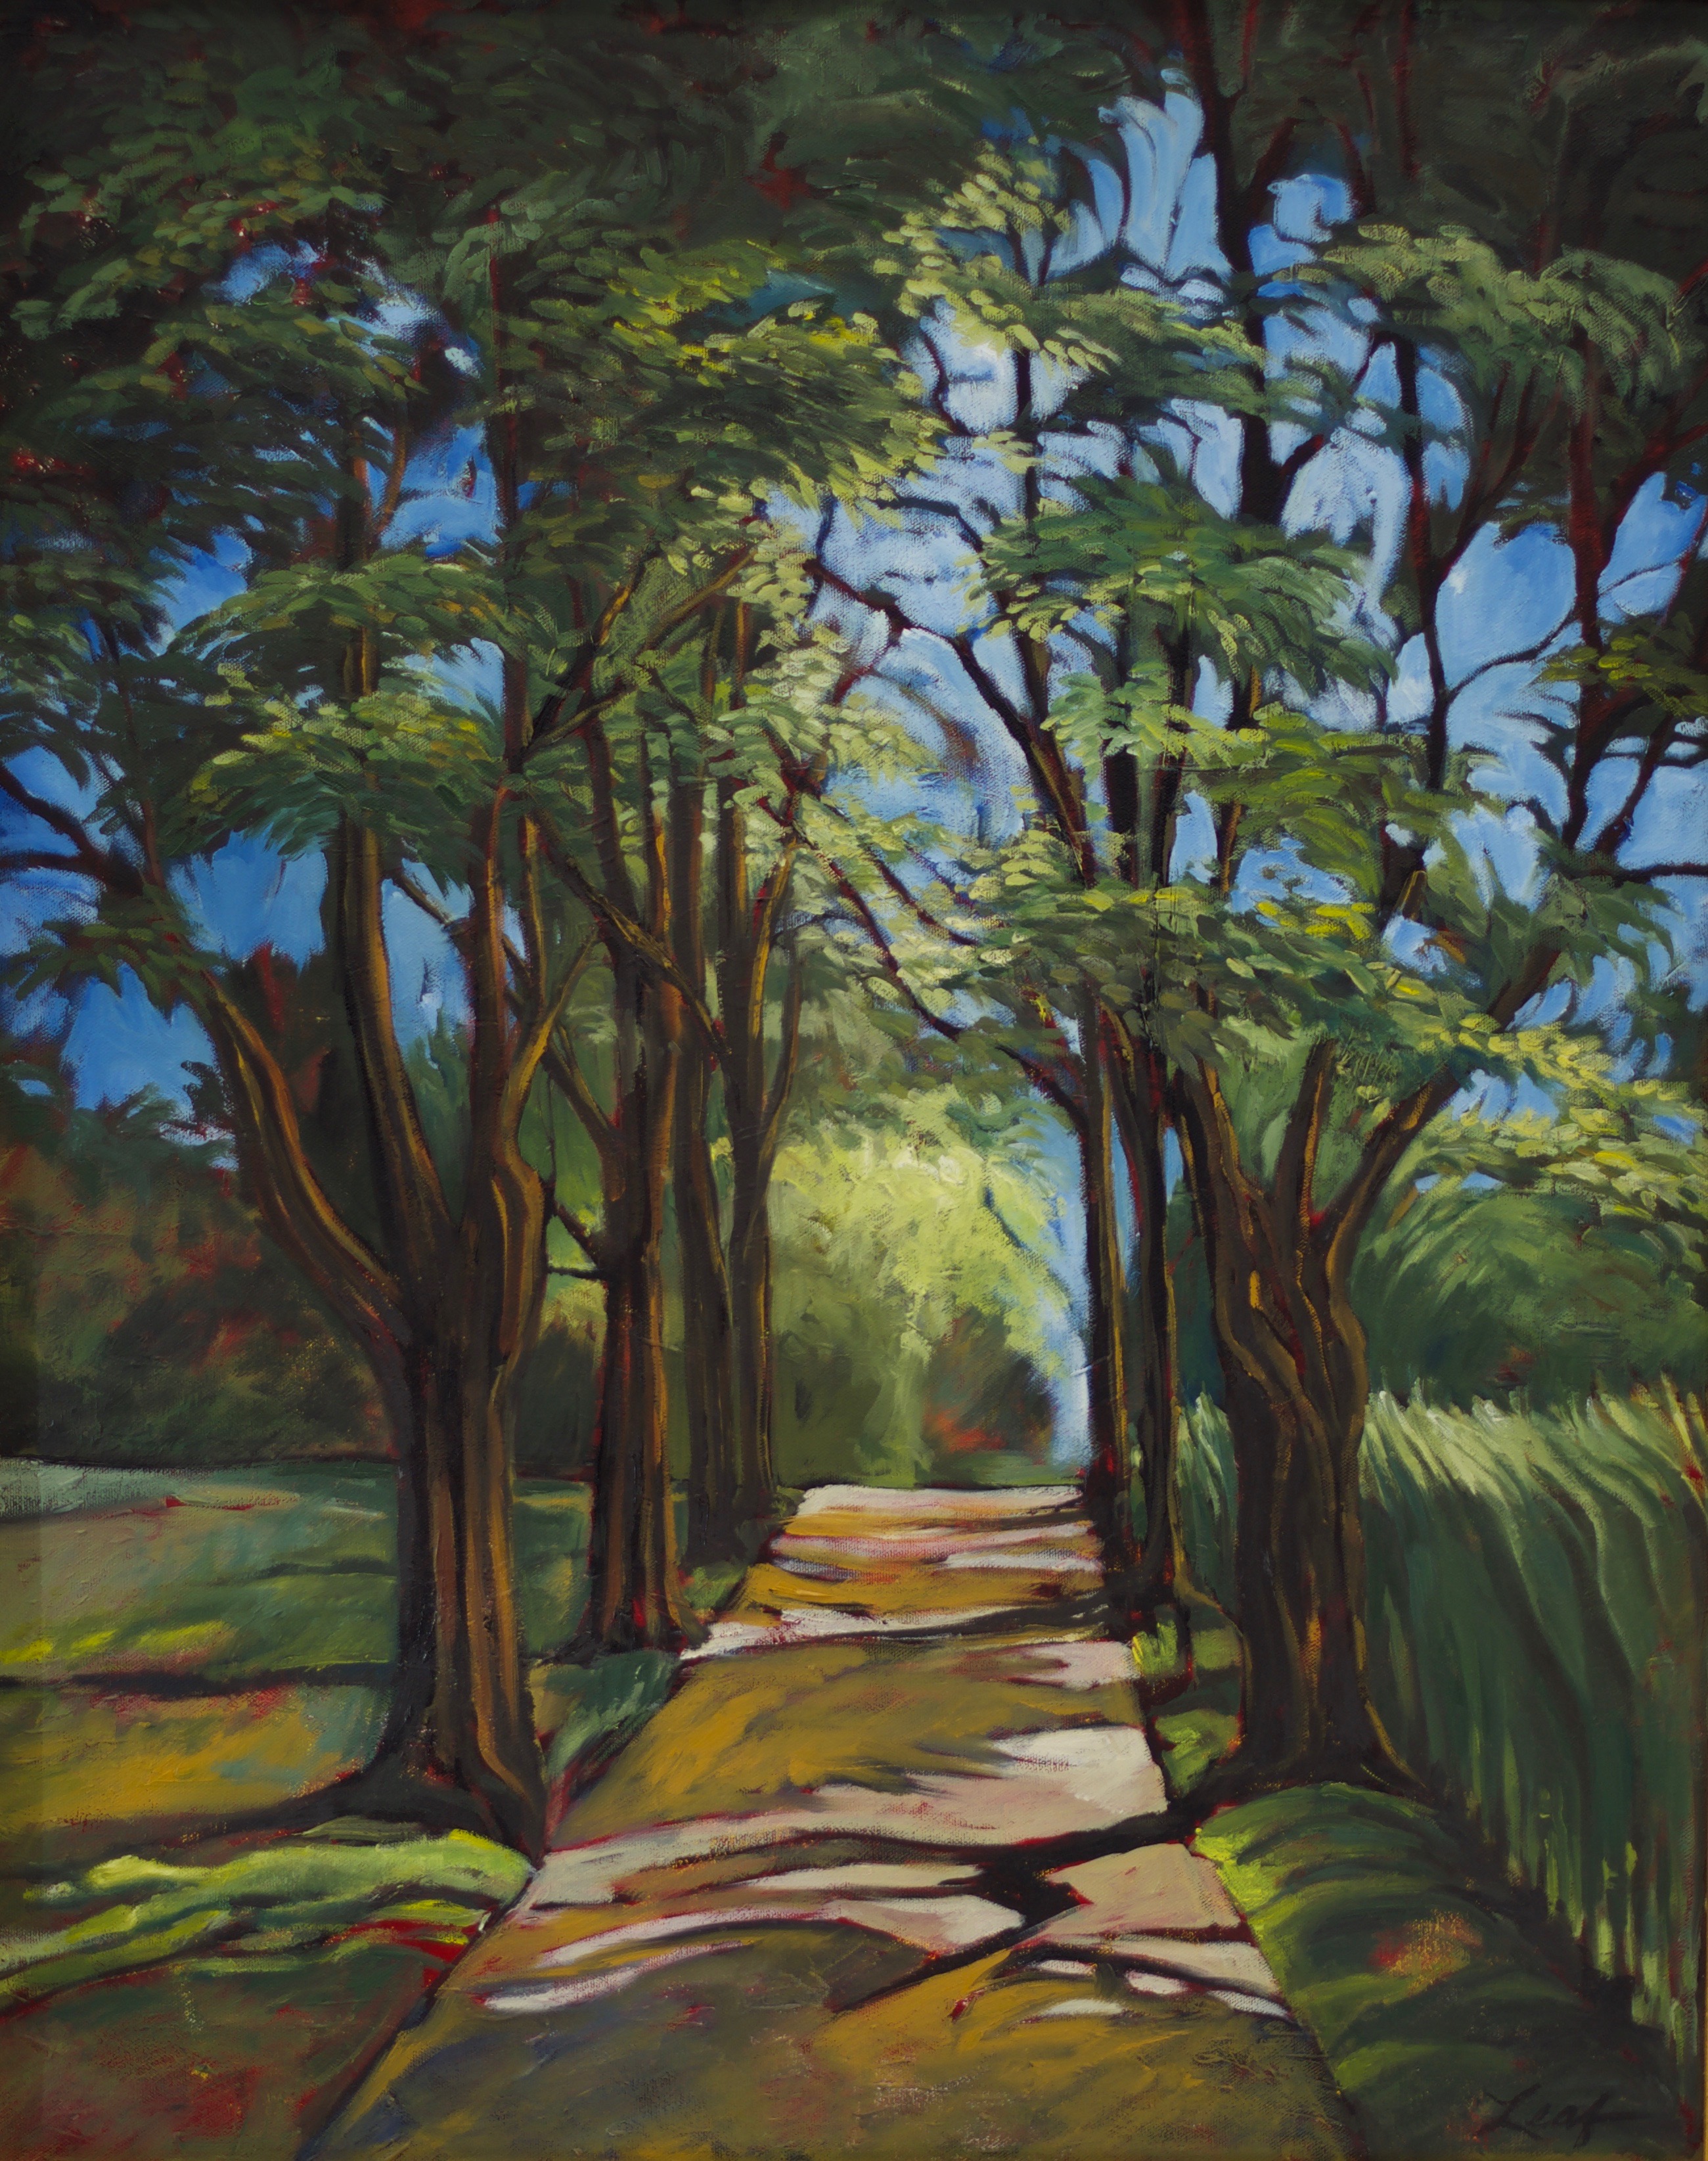 France, Provence, landscape, green, trees, leaves, light, shadows, oil painting, marycalengor